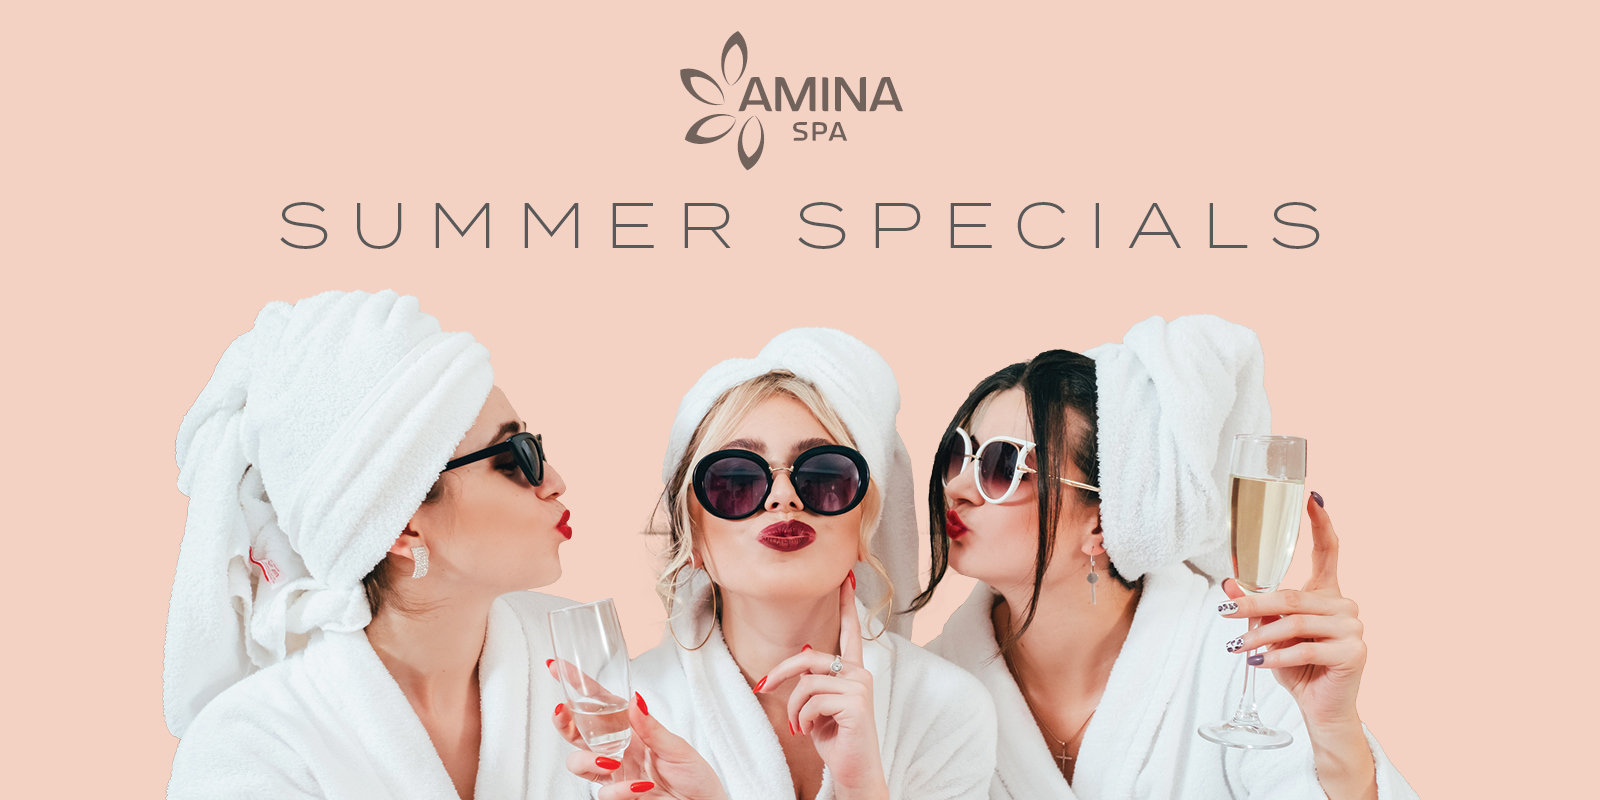 Amina Spa Summer Specials - Three girls enjoying the spa with robes and towels on